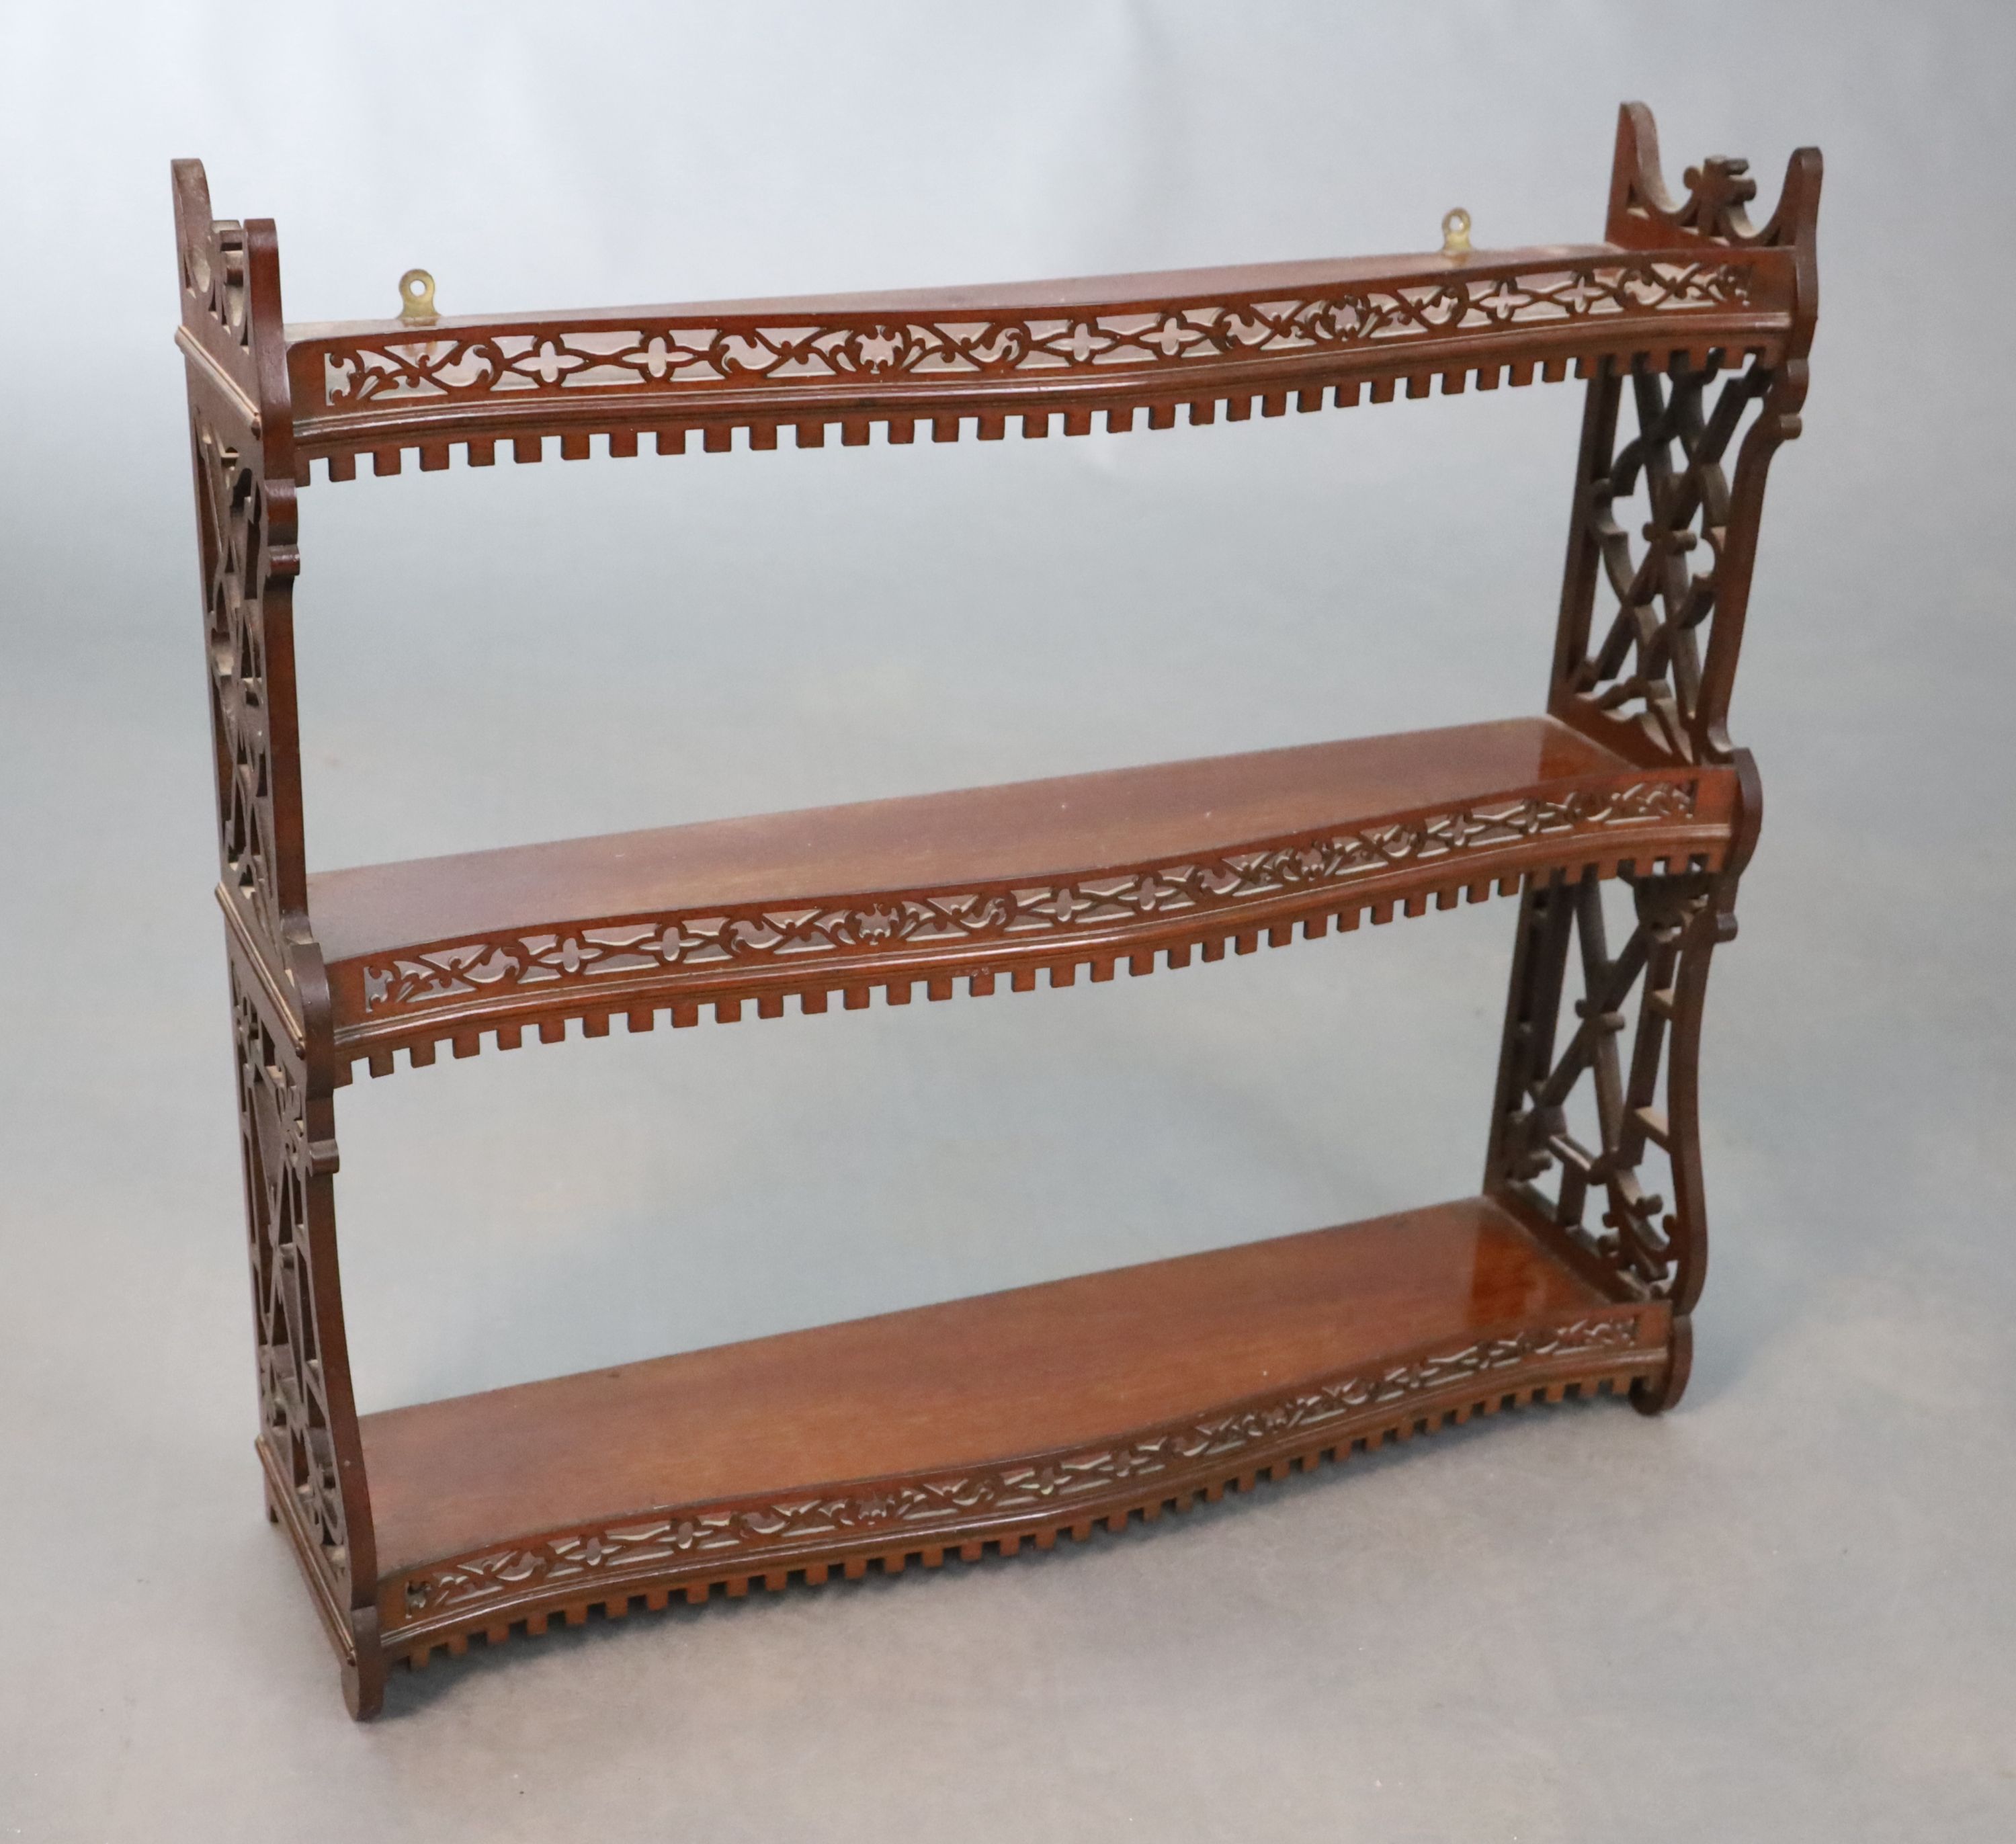 A George II style mahogany three tier wall shelf, with a dentil moulded apron within fretted side